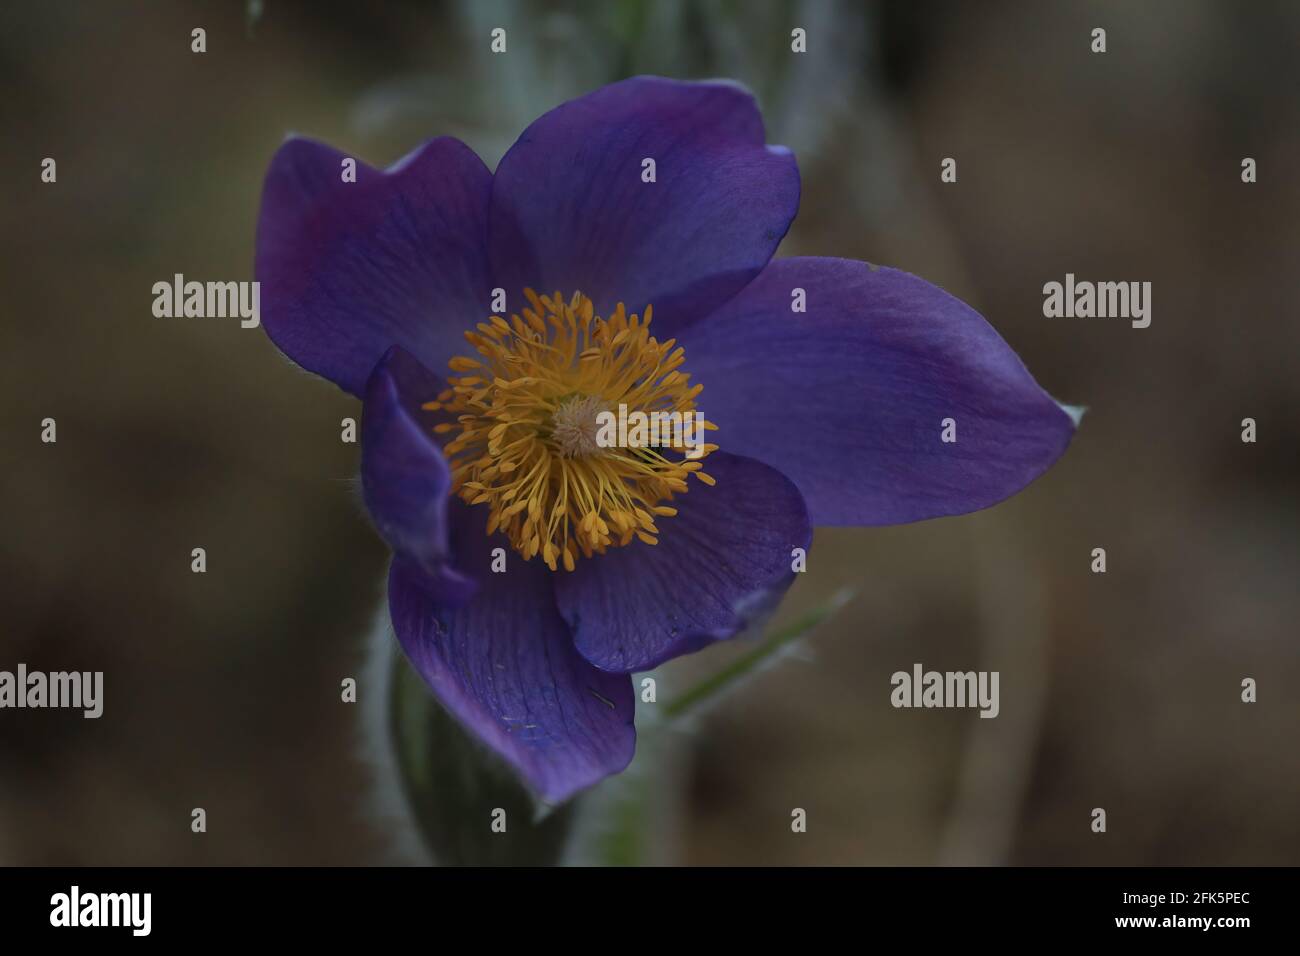 A full blooming Pulsatilla patens bud with purple petals and a yellow center close-up in the open air in springtime. Eastern pasqueflower flower head. Stock Photo